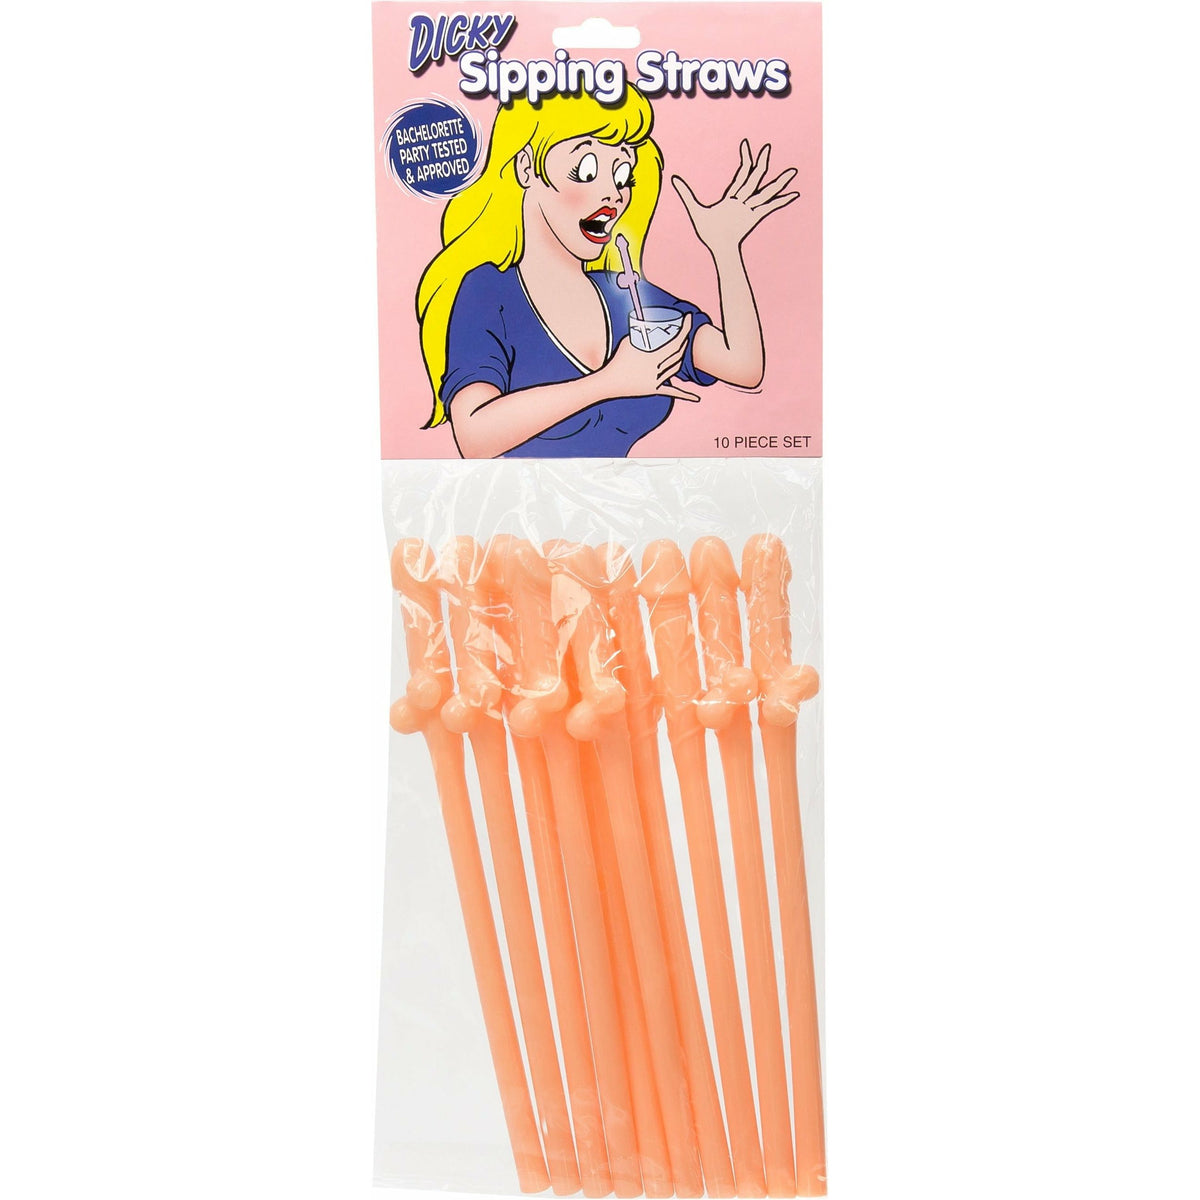 TYTF Dicky Sipping Straws- 10pc Set